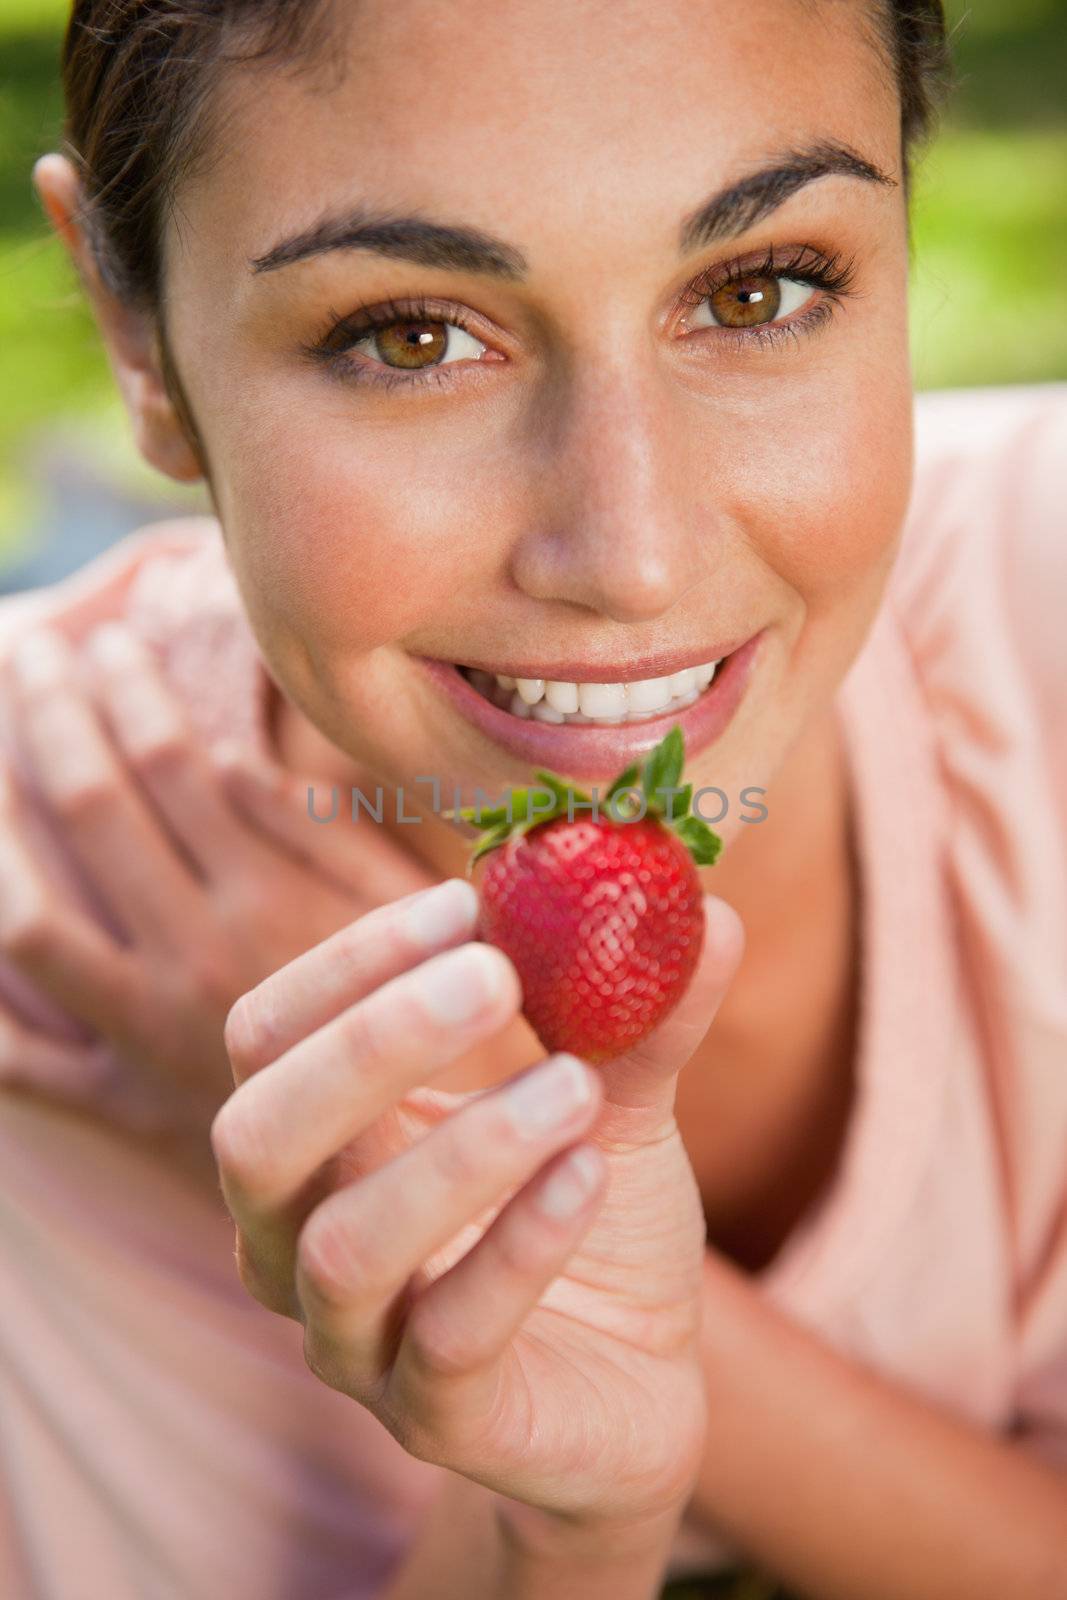 Woman offering a strawberry while lying in grass by Wavebreakmedia